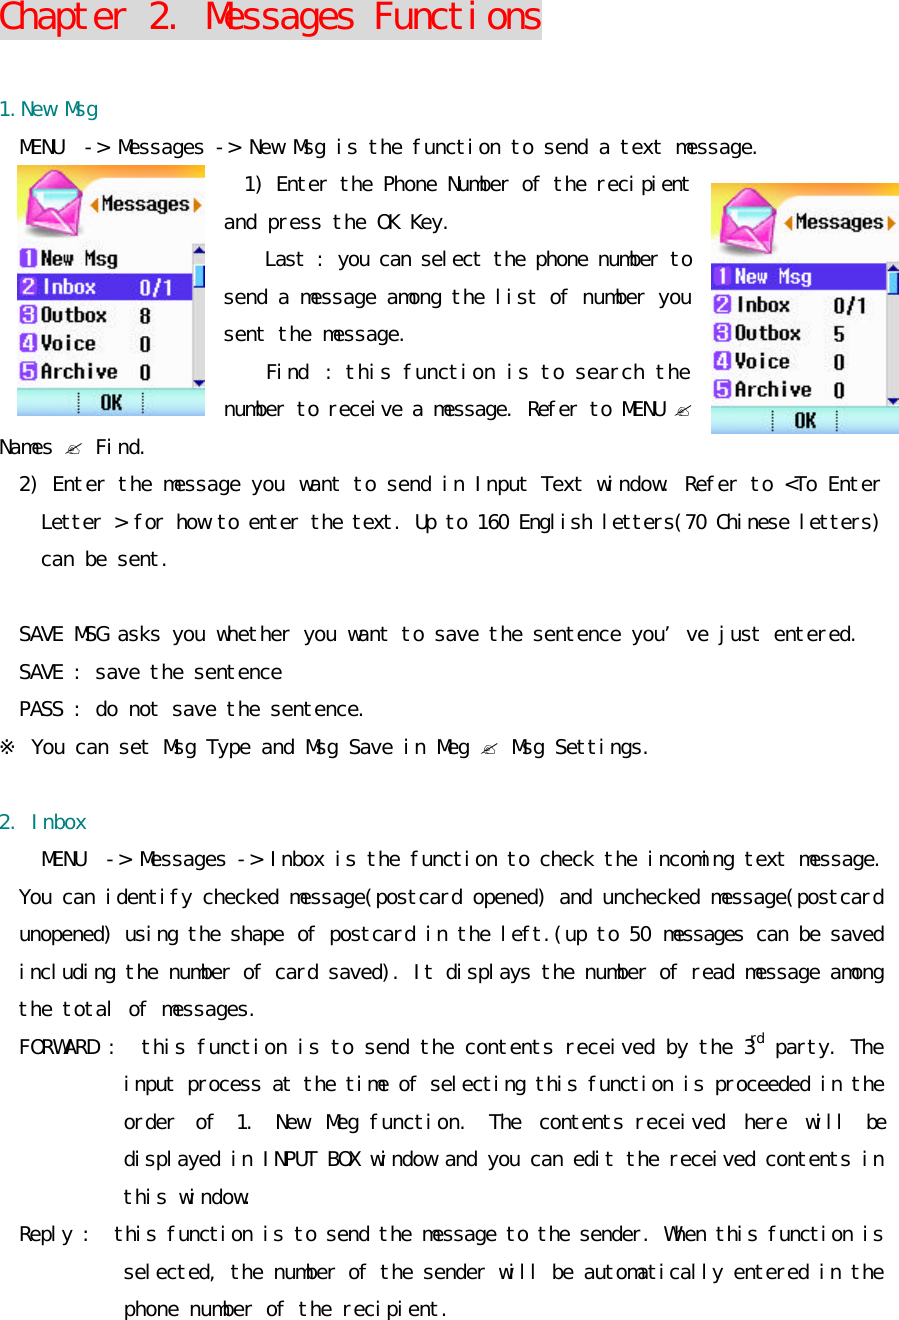 Chapter 2. Messages Functions  1.New Msg MENU  -&gt; Messages -&gt; New Msg is the function to send a text message.  1) Enter the Phone Number of the recipient and press the OK Key.   Last : you can select the phone number to send a message among the list of number you sent the message. Find : this function is to search the number to receive a message. Refer to MENU ? Names ? Find. 2) Enter the message you want to send in Input Text window. Refer to &lt;To Enter Letter &gt; for how to enter the text. Up to 160 English letters(70 Chinese letters) can be sent.   SAVE MSG asks you whether you want to save the sentence you’ve just entered.  SAVE : save the sentence PASS : do not save the sentence. ※ You can set Msg Type and Msg Save in Meg ? Msg Settings.  2. Inbox MENU  -&gt; Messages -&gt; Inbox is the function to check the incoming text message.  You can identify checked message(postcard opened) and unchecked message(postcard unopened) using the shape of postcard in the left.(up to 50 messages can be saved including the number of card saved). It displays the number of read message among the total of messages.  FORWARD :  this function is to send the contents received by the 3rd party. The input process at the time of selecting this function is proceeded in the order of 1. New Meg function. The contents received here will be displayed in INPUT BOX window and you can edit the received contents in this window.  Reply :  this function is to send the message to the sender. When this function is selected, the number of the sender will be automatically entered in the phone number of the recipient.  